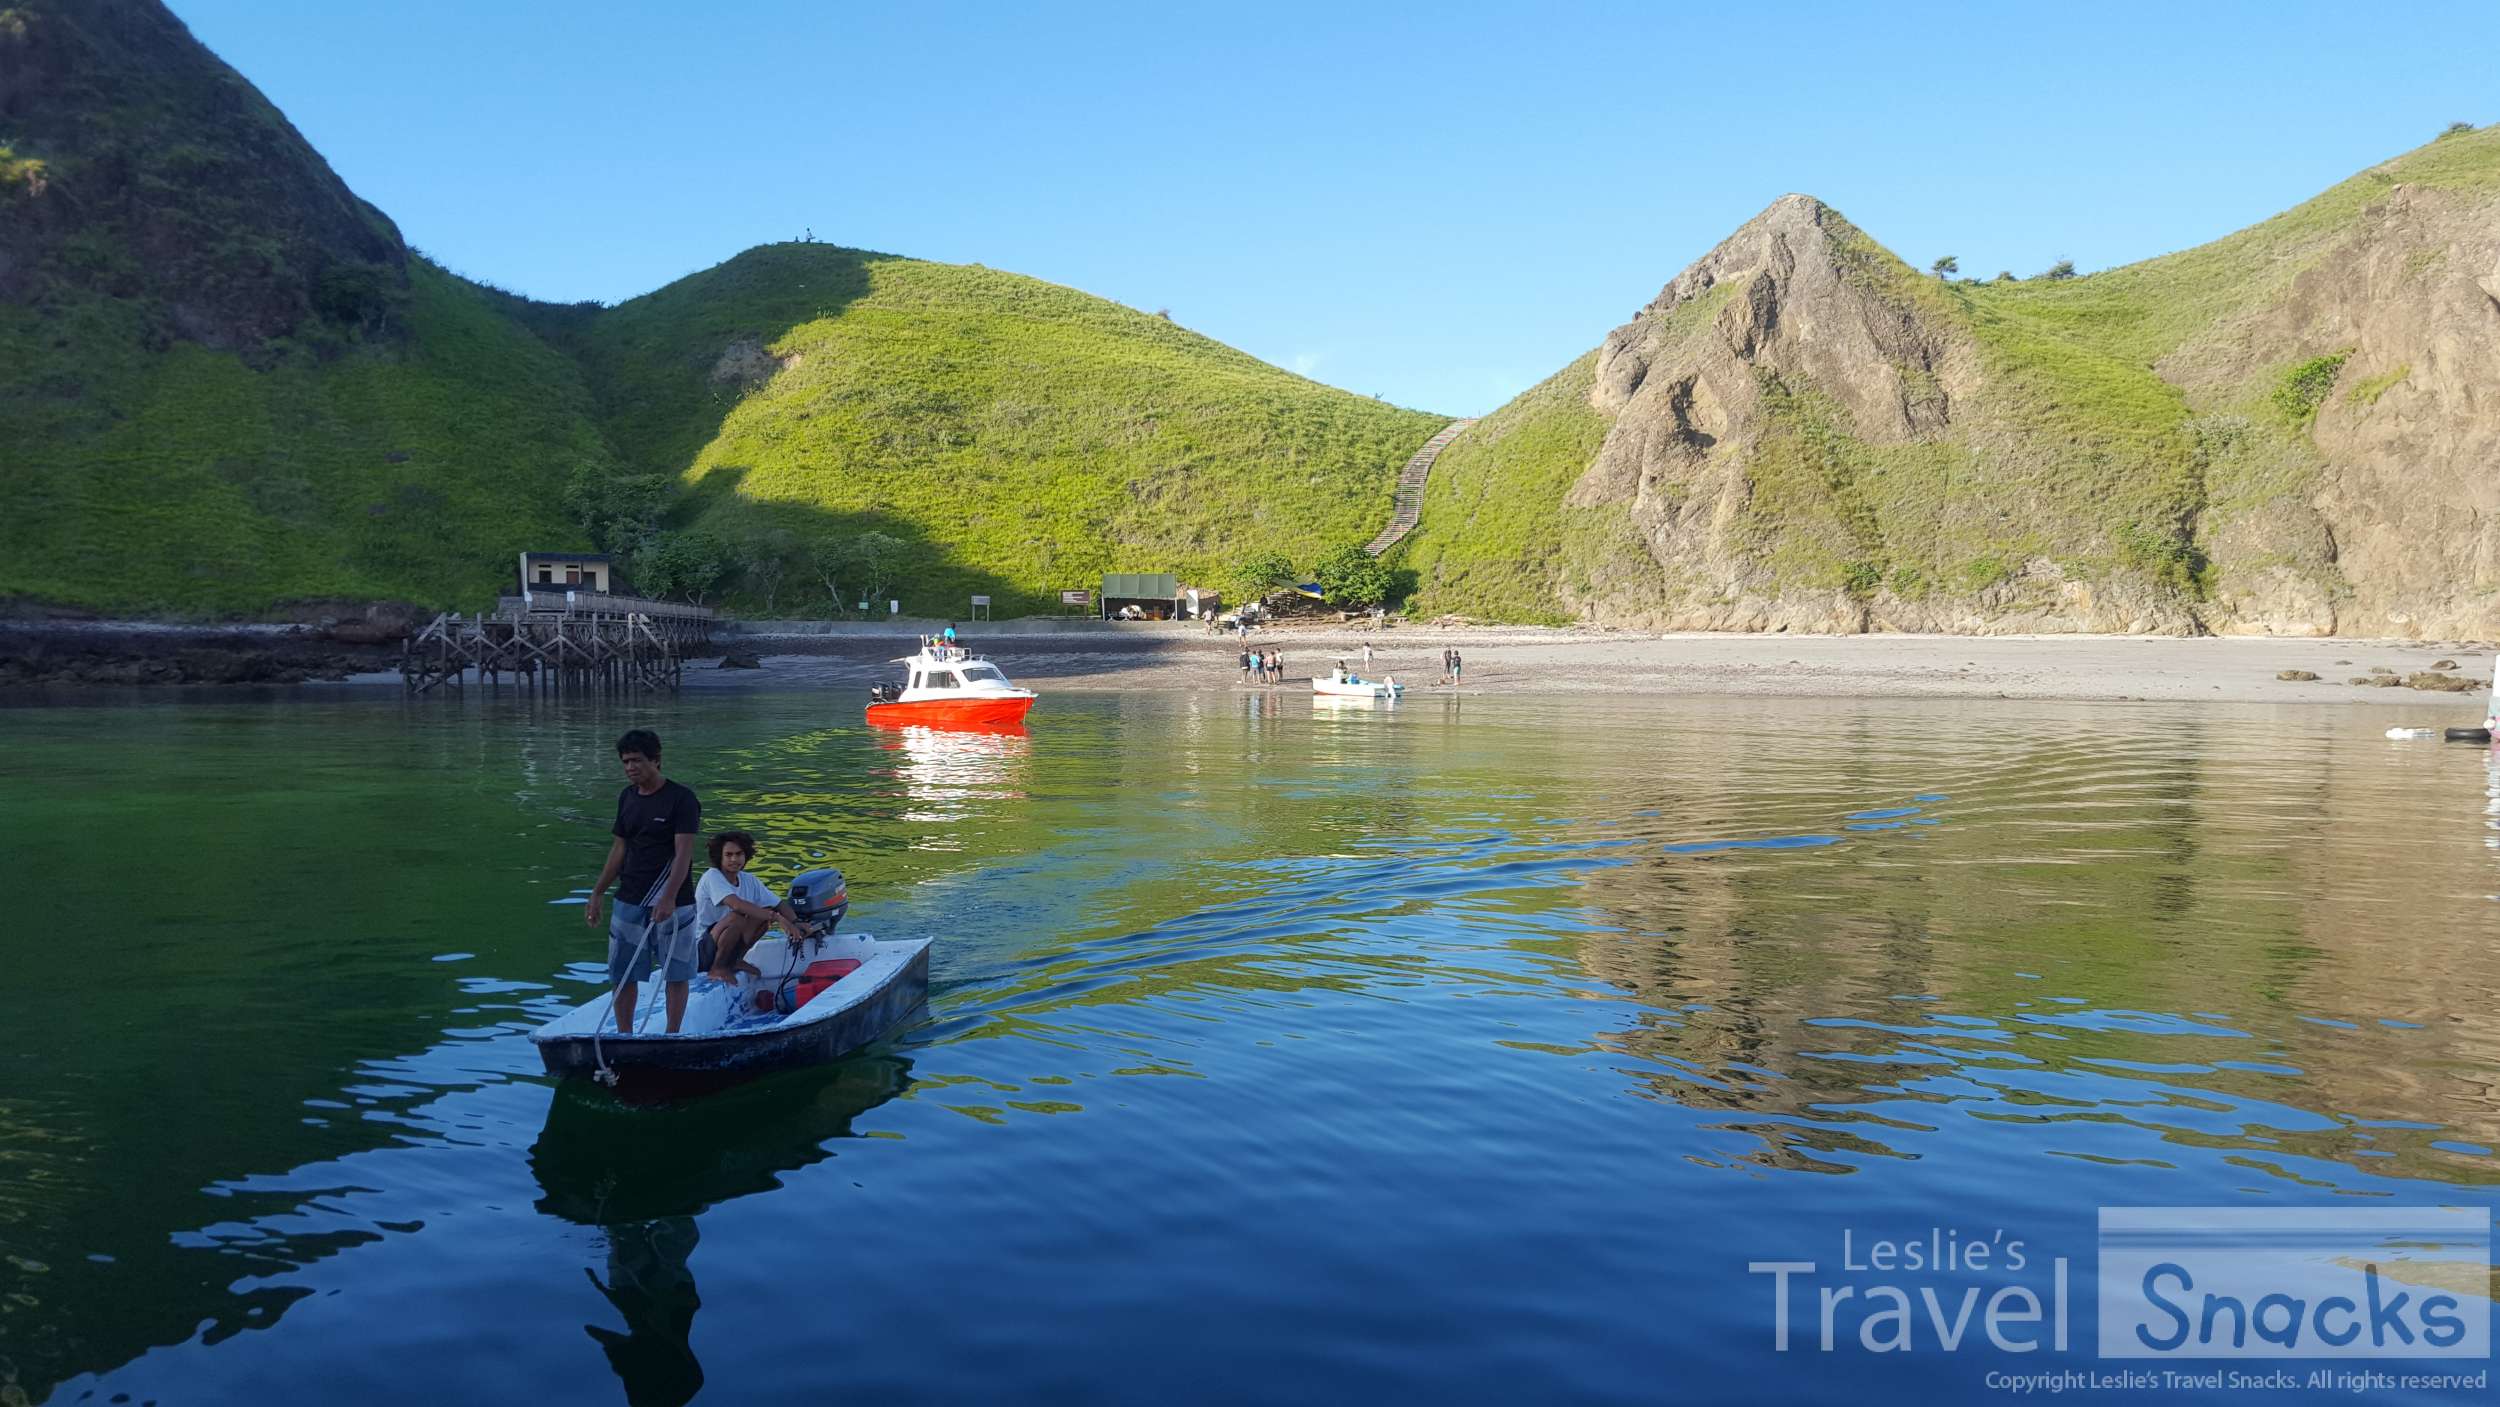 Tendering in to Padar from our tour boat early in the morning.